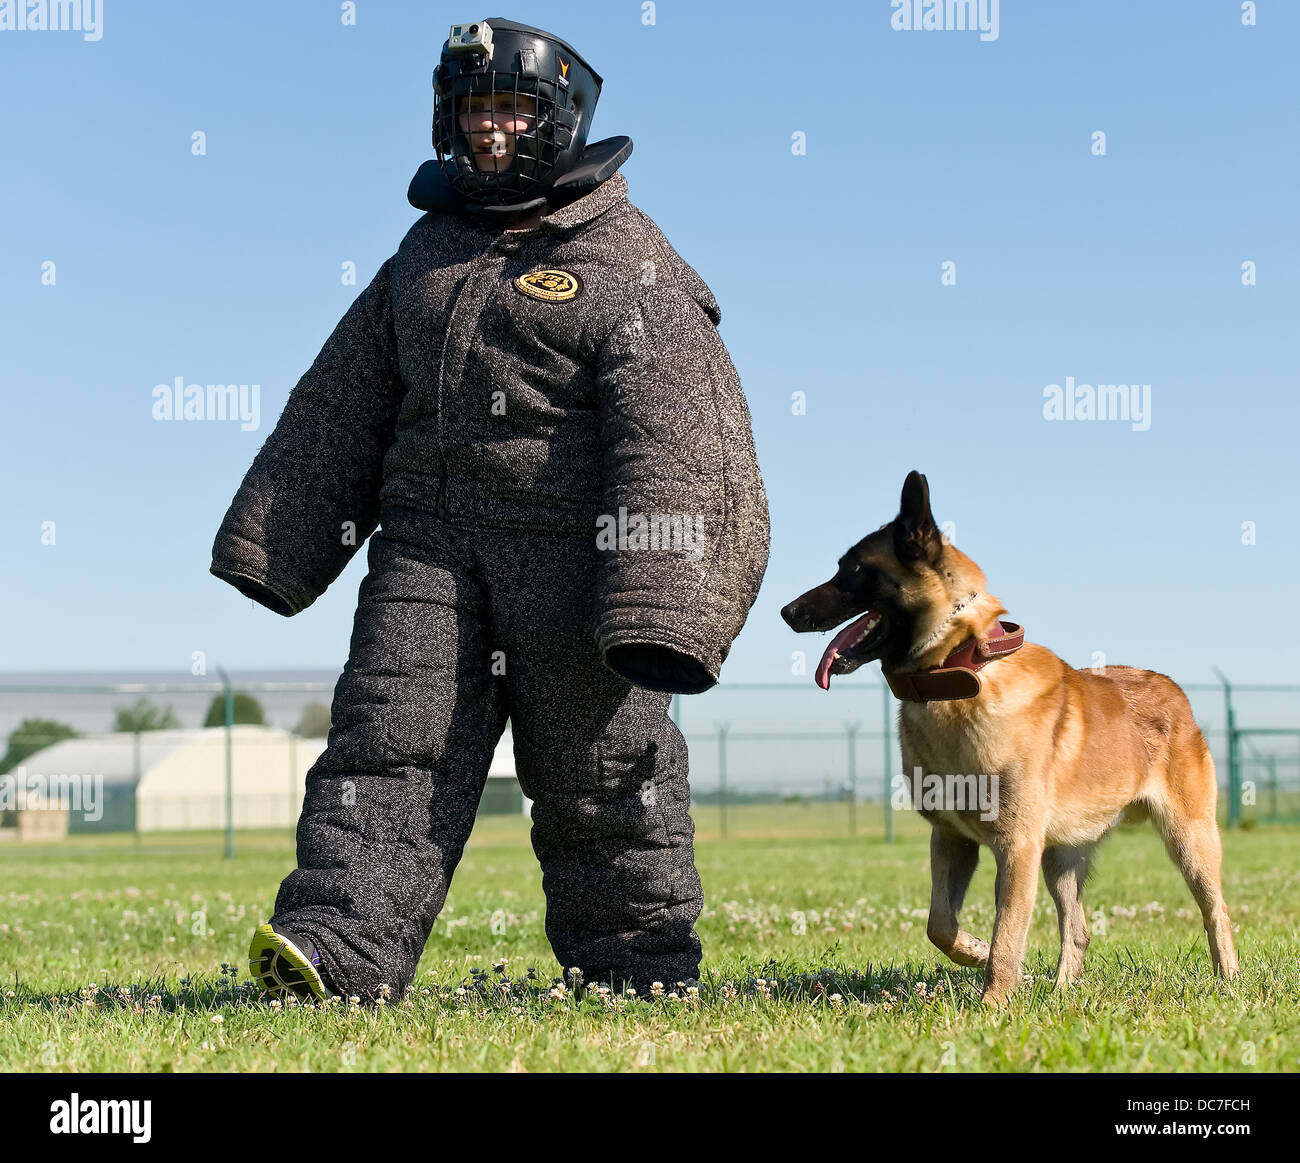 Ashley Barnas, a reporter with The Wilmington News Journal walks alongside Cuervo, a military working dog with the 436th Security Forces Squadron July 30, 2013 at Dover Air Force Base, DE. Cuervo is trained to attack if Barnas made any sudden or provoking movements. Stock Photo